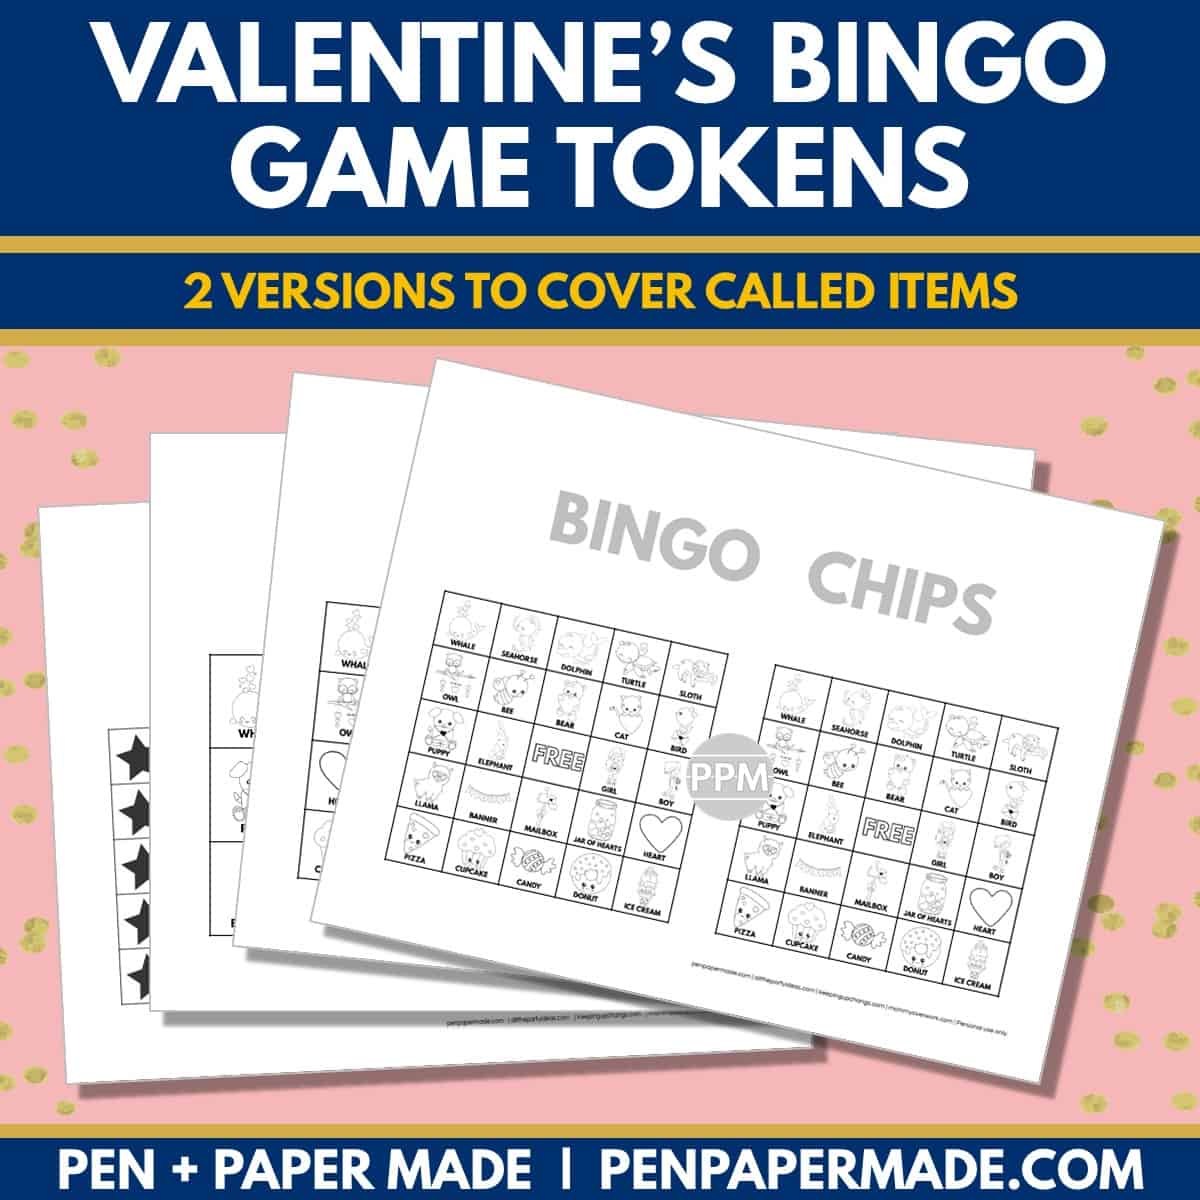 valentine's day bingo card 5x5, 4x4, 3x3 game chips, tokens, markers.